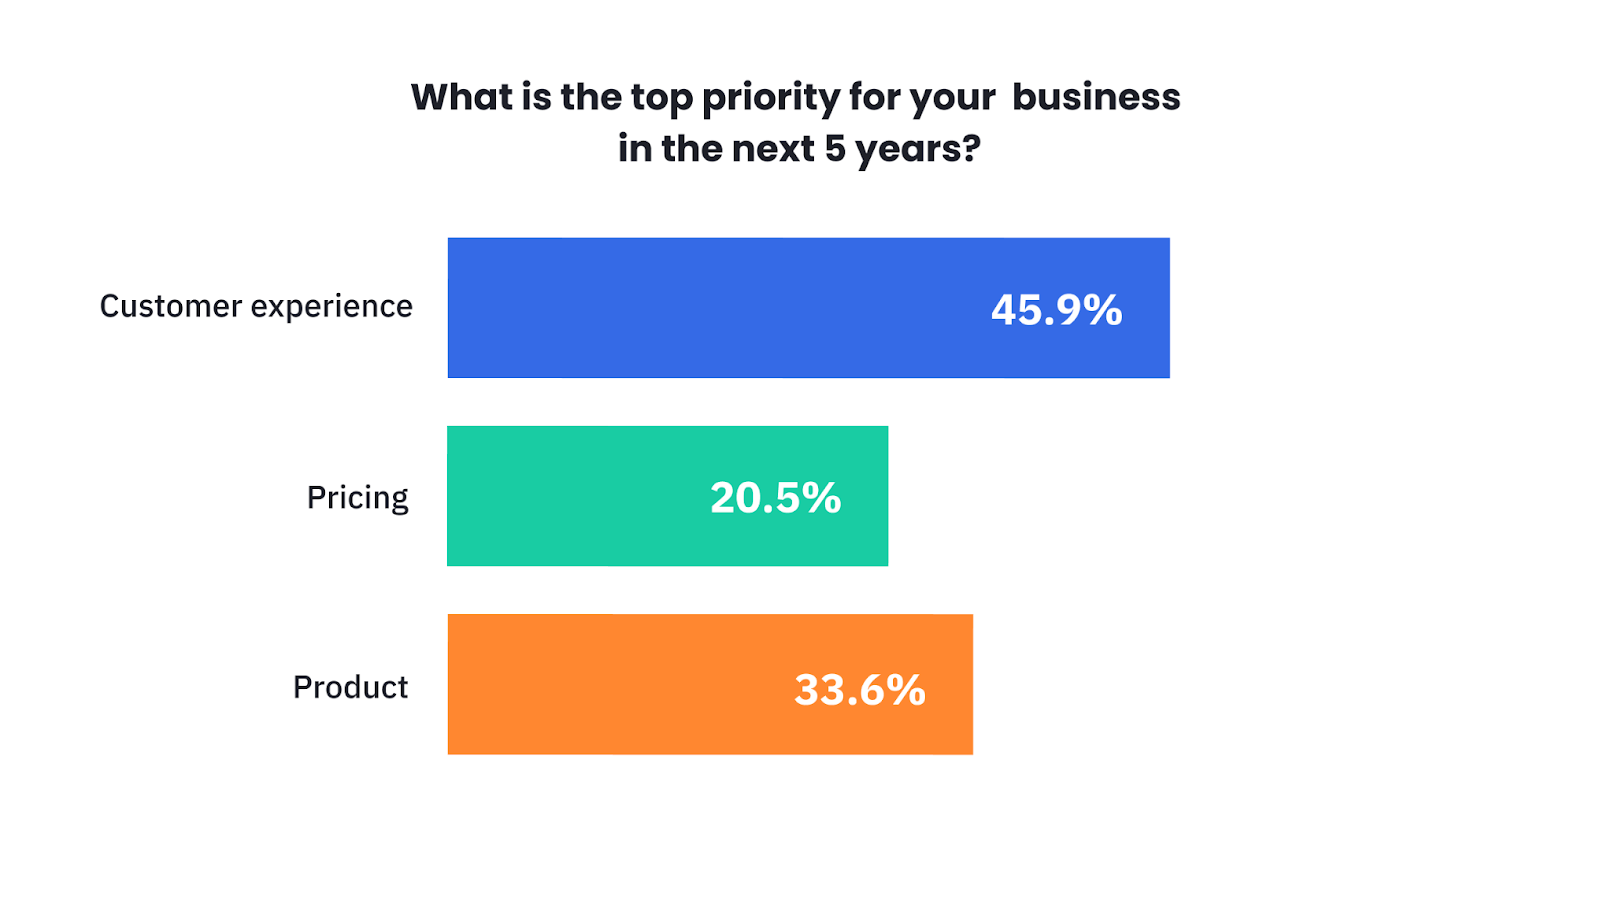 SuperOffice survey shows that businesses prioritize customer experience